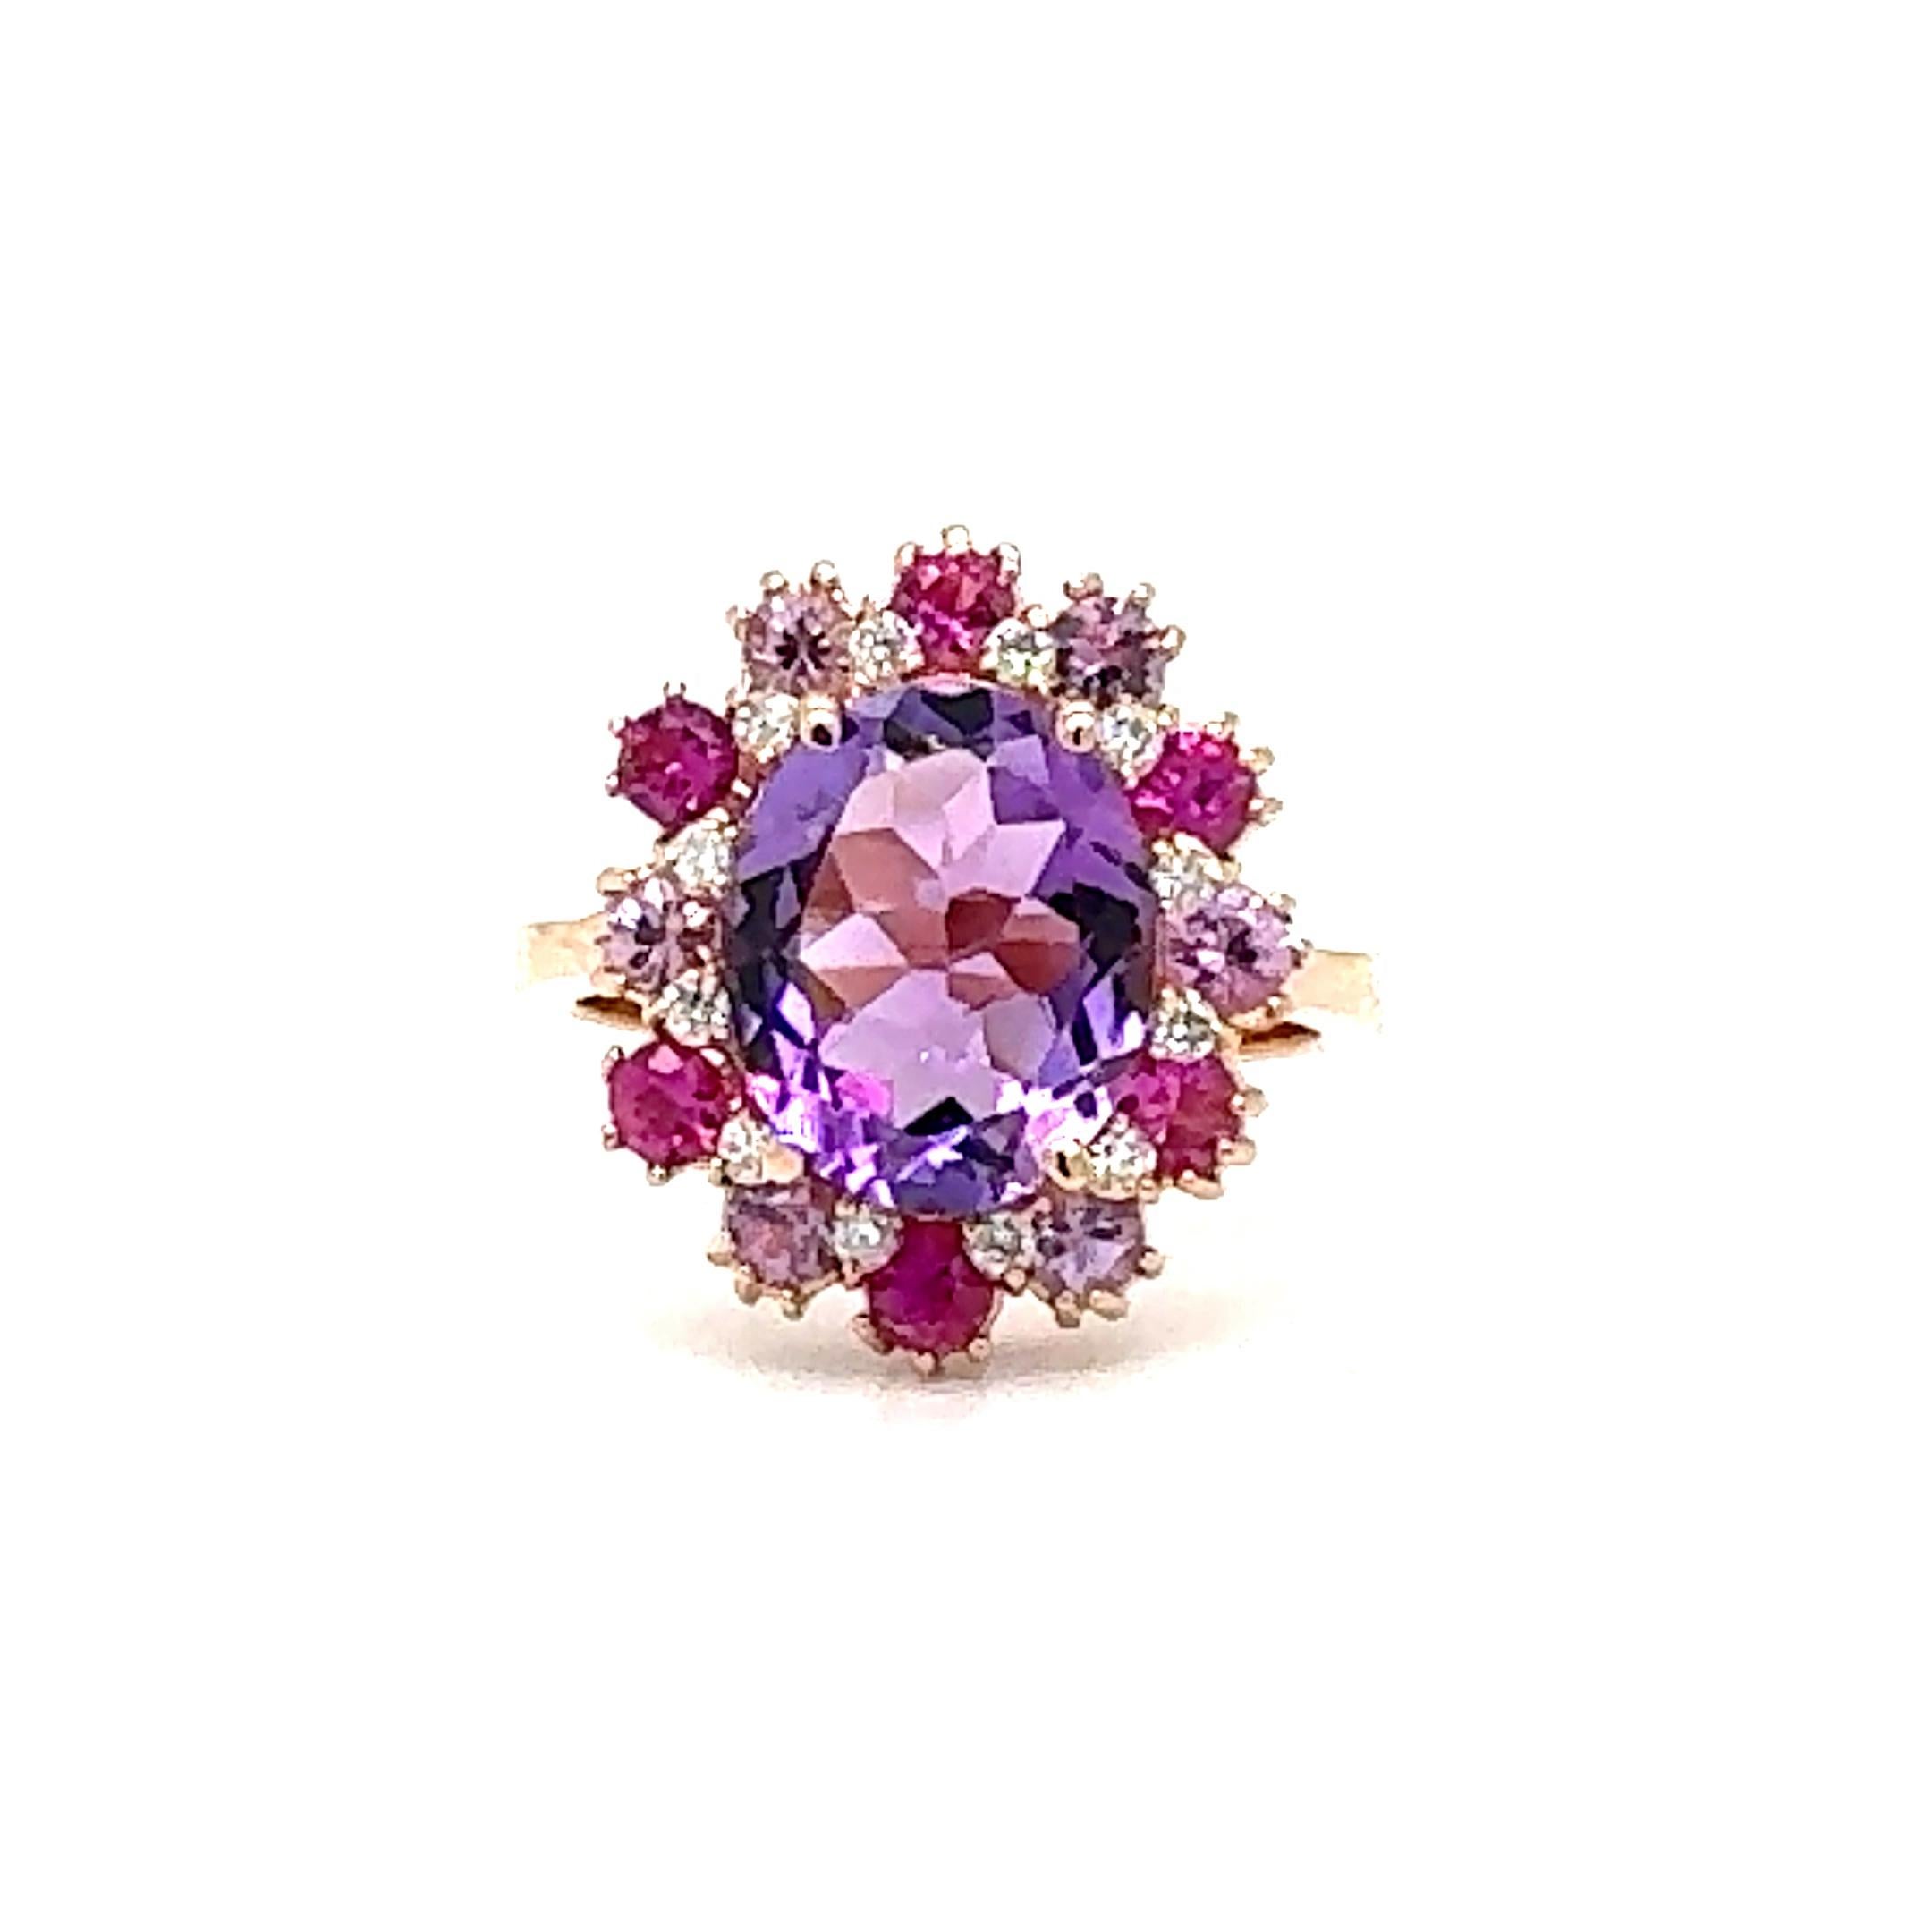 Amethyst, Pink Sapphire, and Diamond Cocktail Ring! 

Playful yet Powerful! Its like having a piece of glittery candy on your finger! This ring has an Oval Cut Amethyst that weighs 2.85 Carats and is embellished with alternating 12 Light and dark